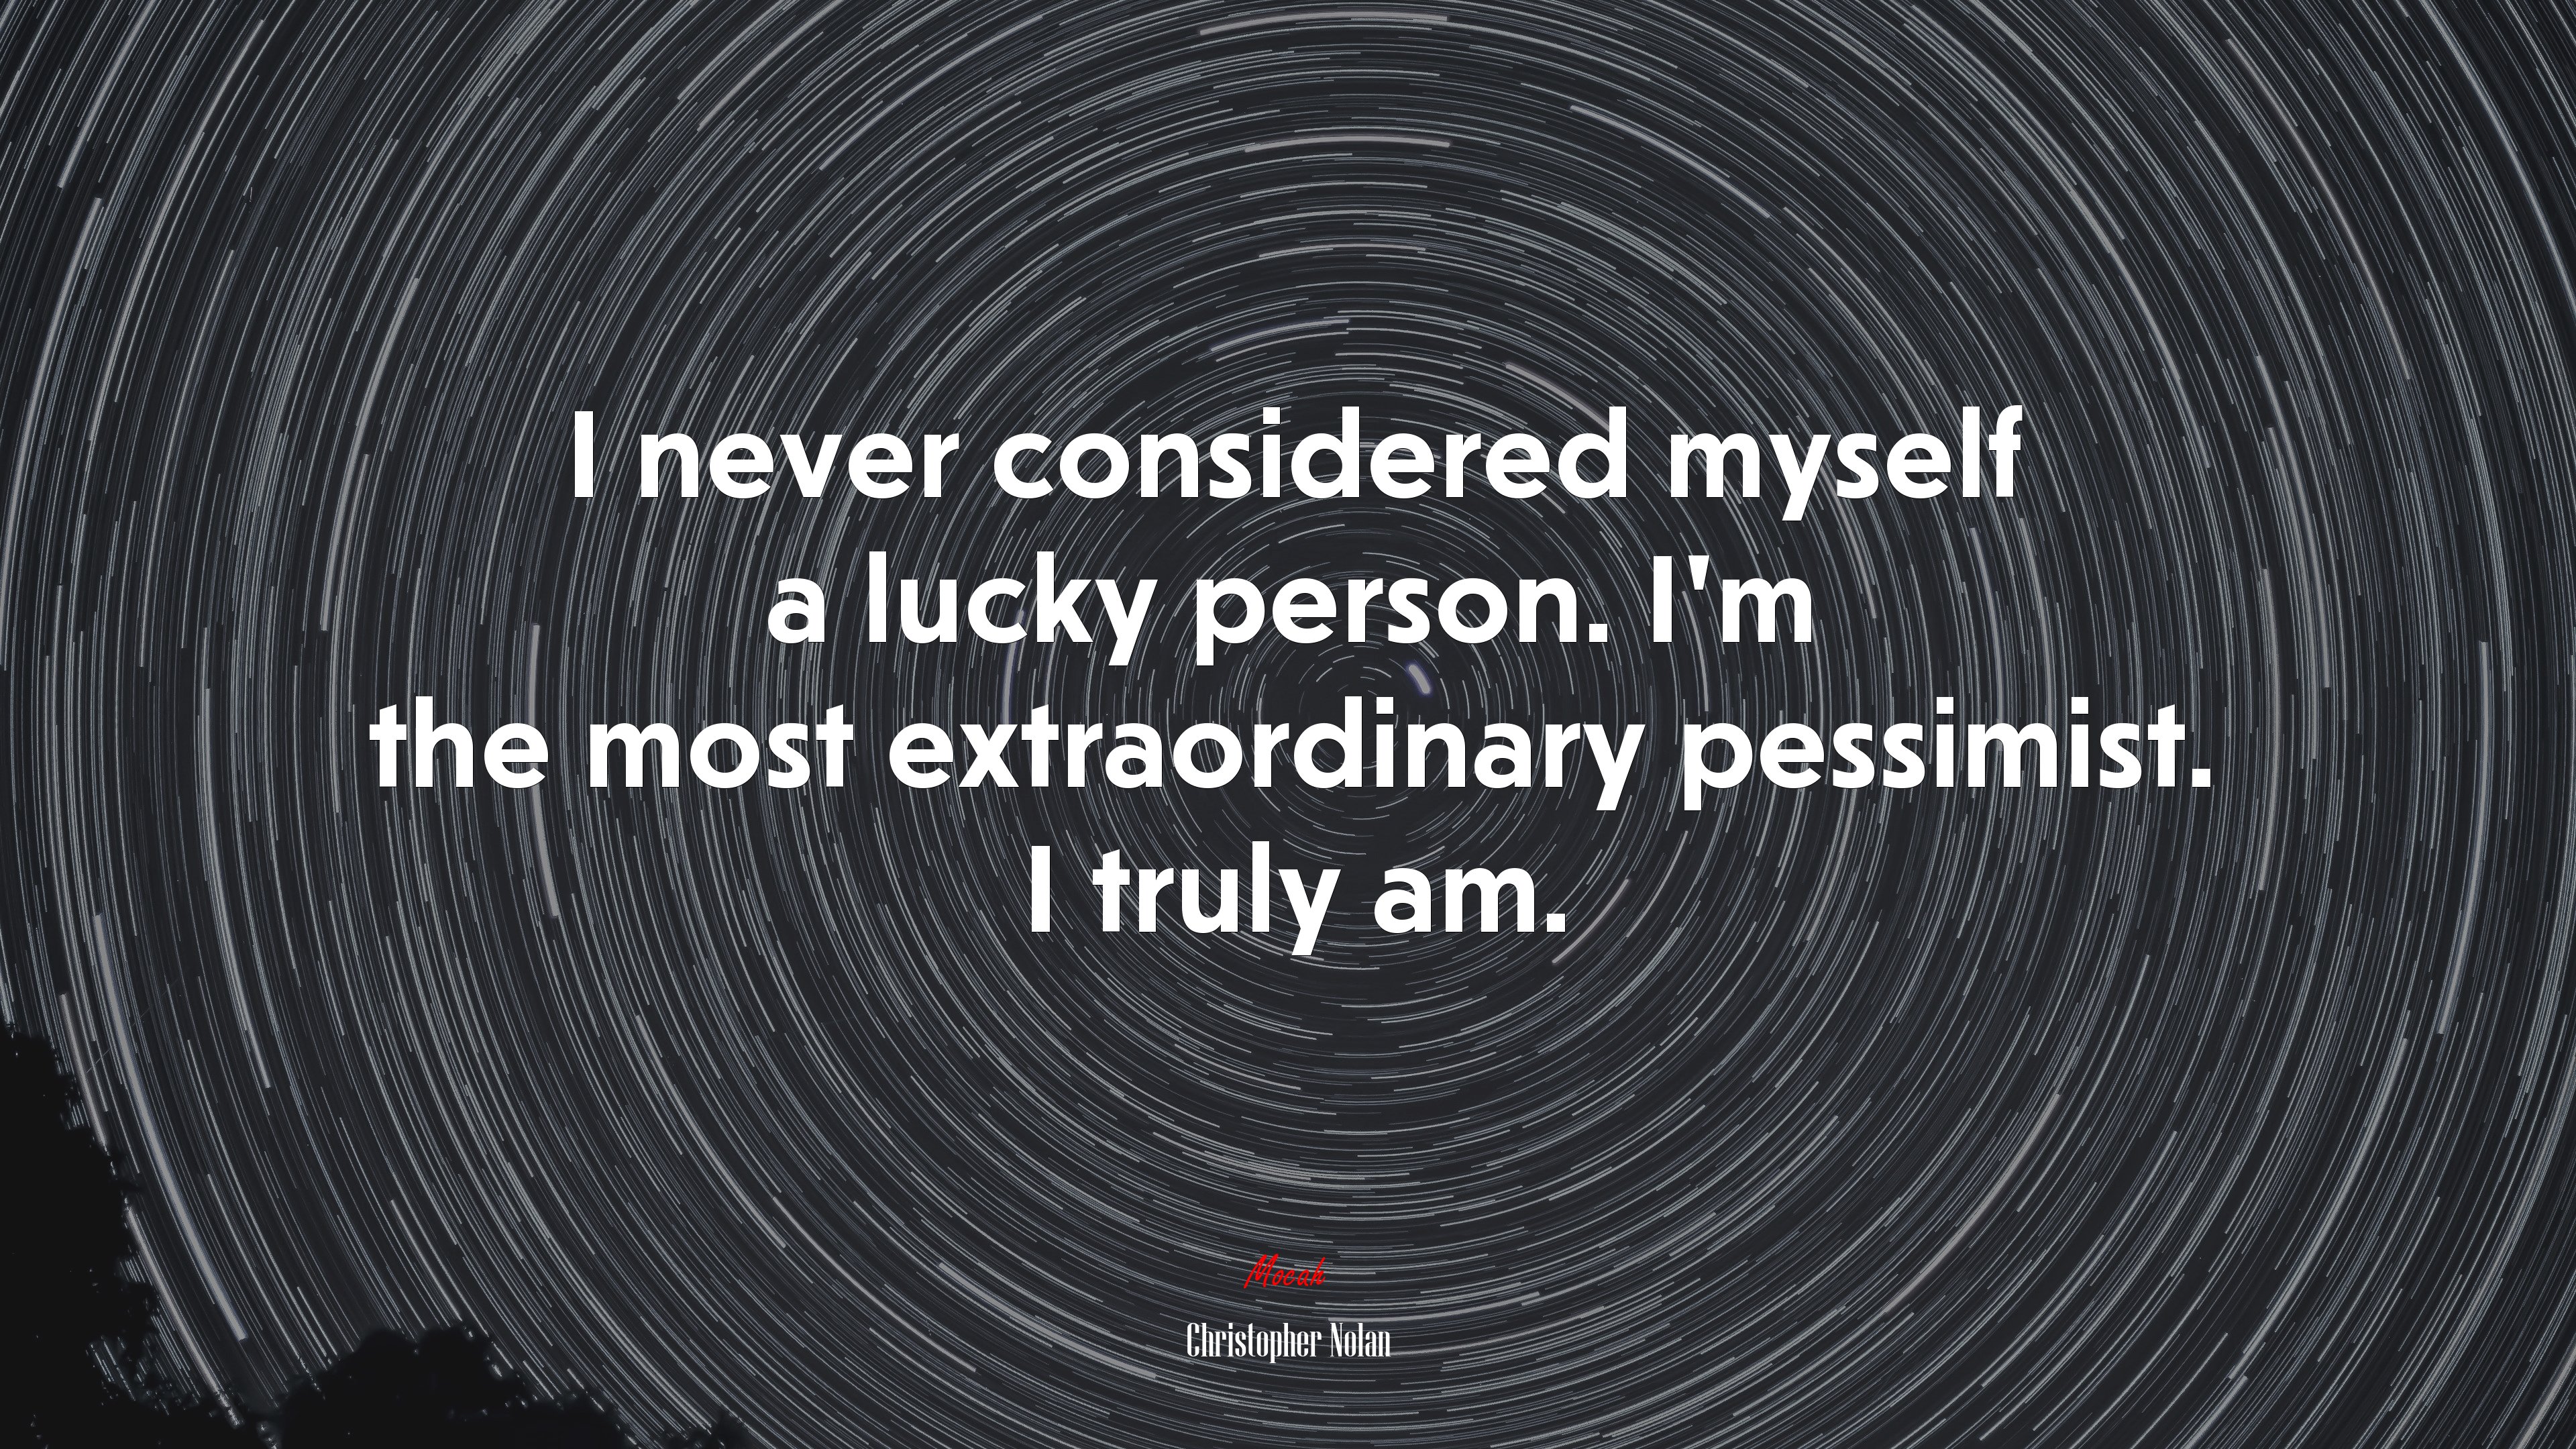 I never considered myself a lucky person. I'm the most extraordinary pessimist. I truly am. Christopher Nolan quote Gallery HD Wallpaper